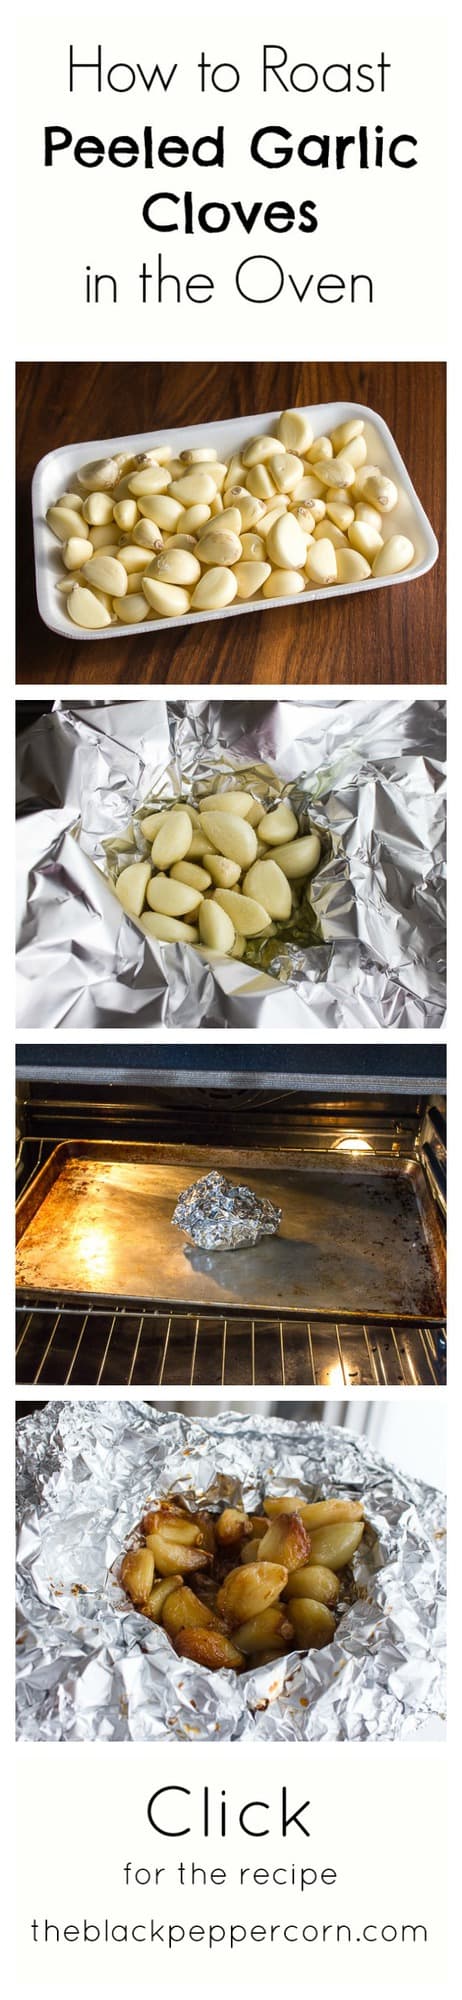 How to Roast Peeled Garlic in the Oven pinterest